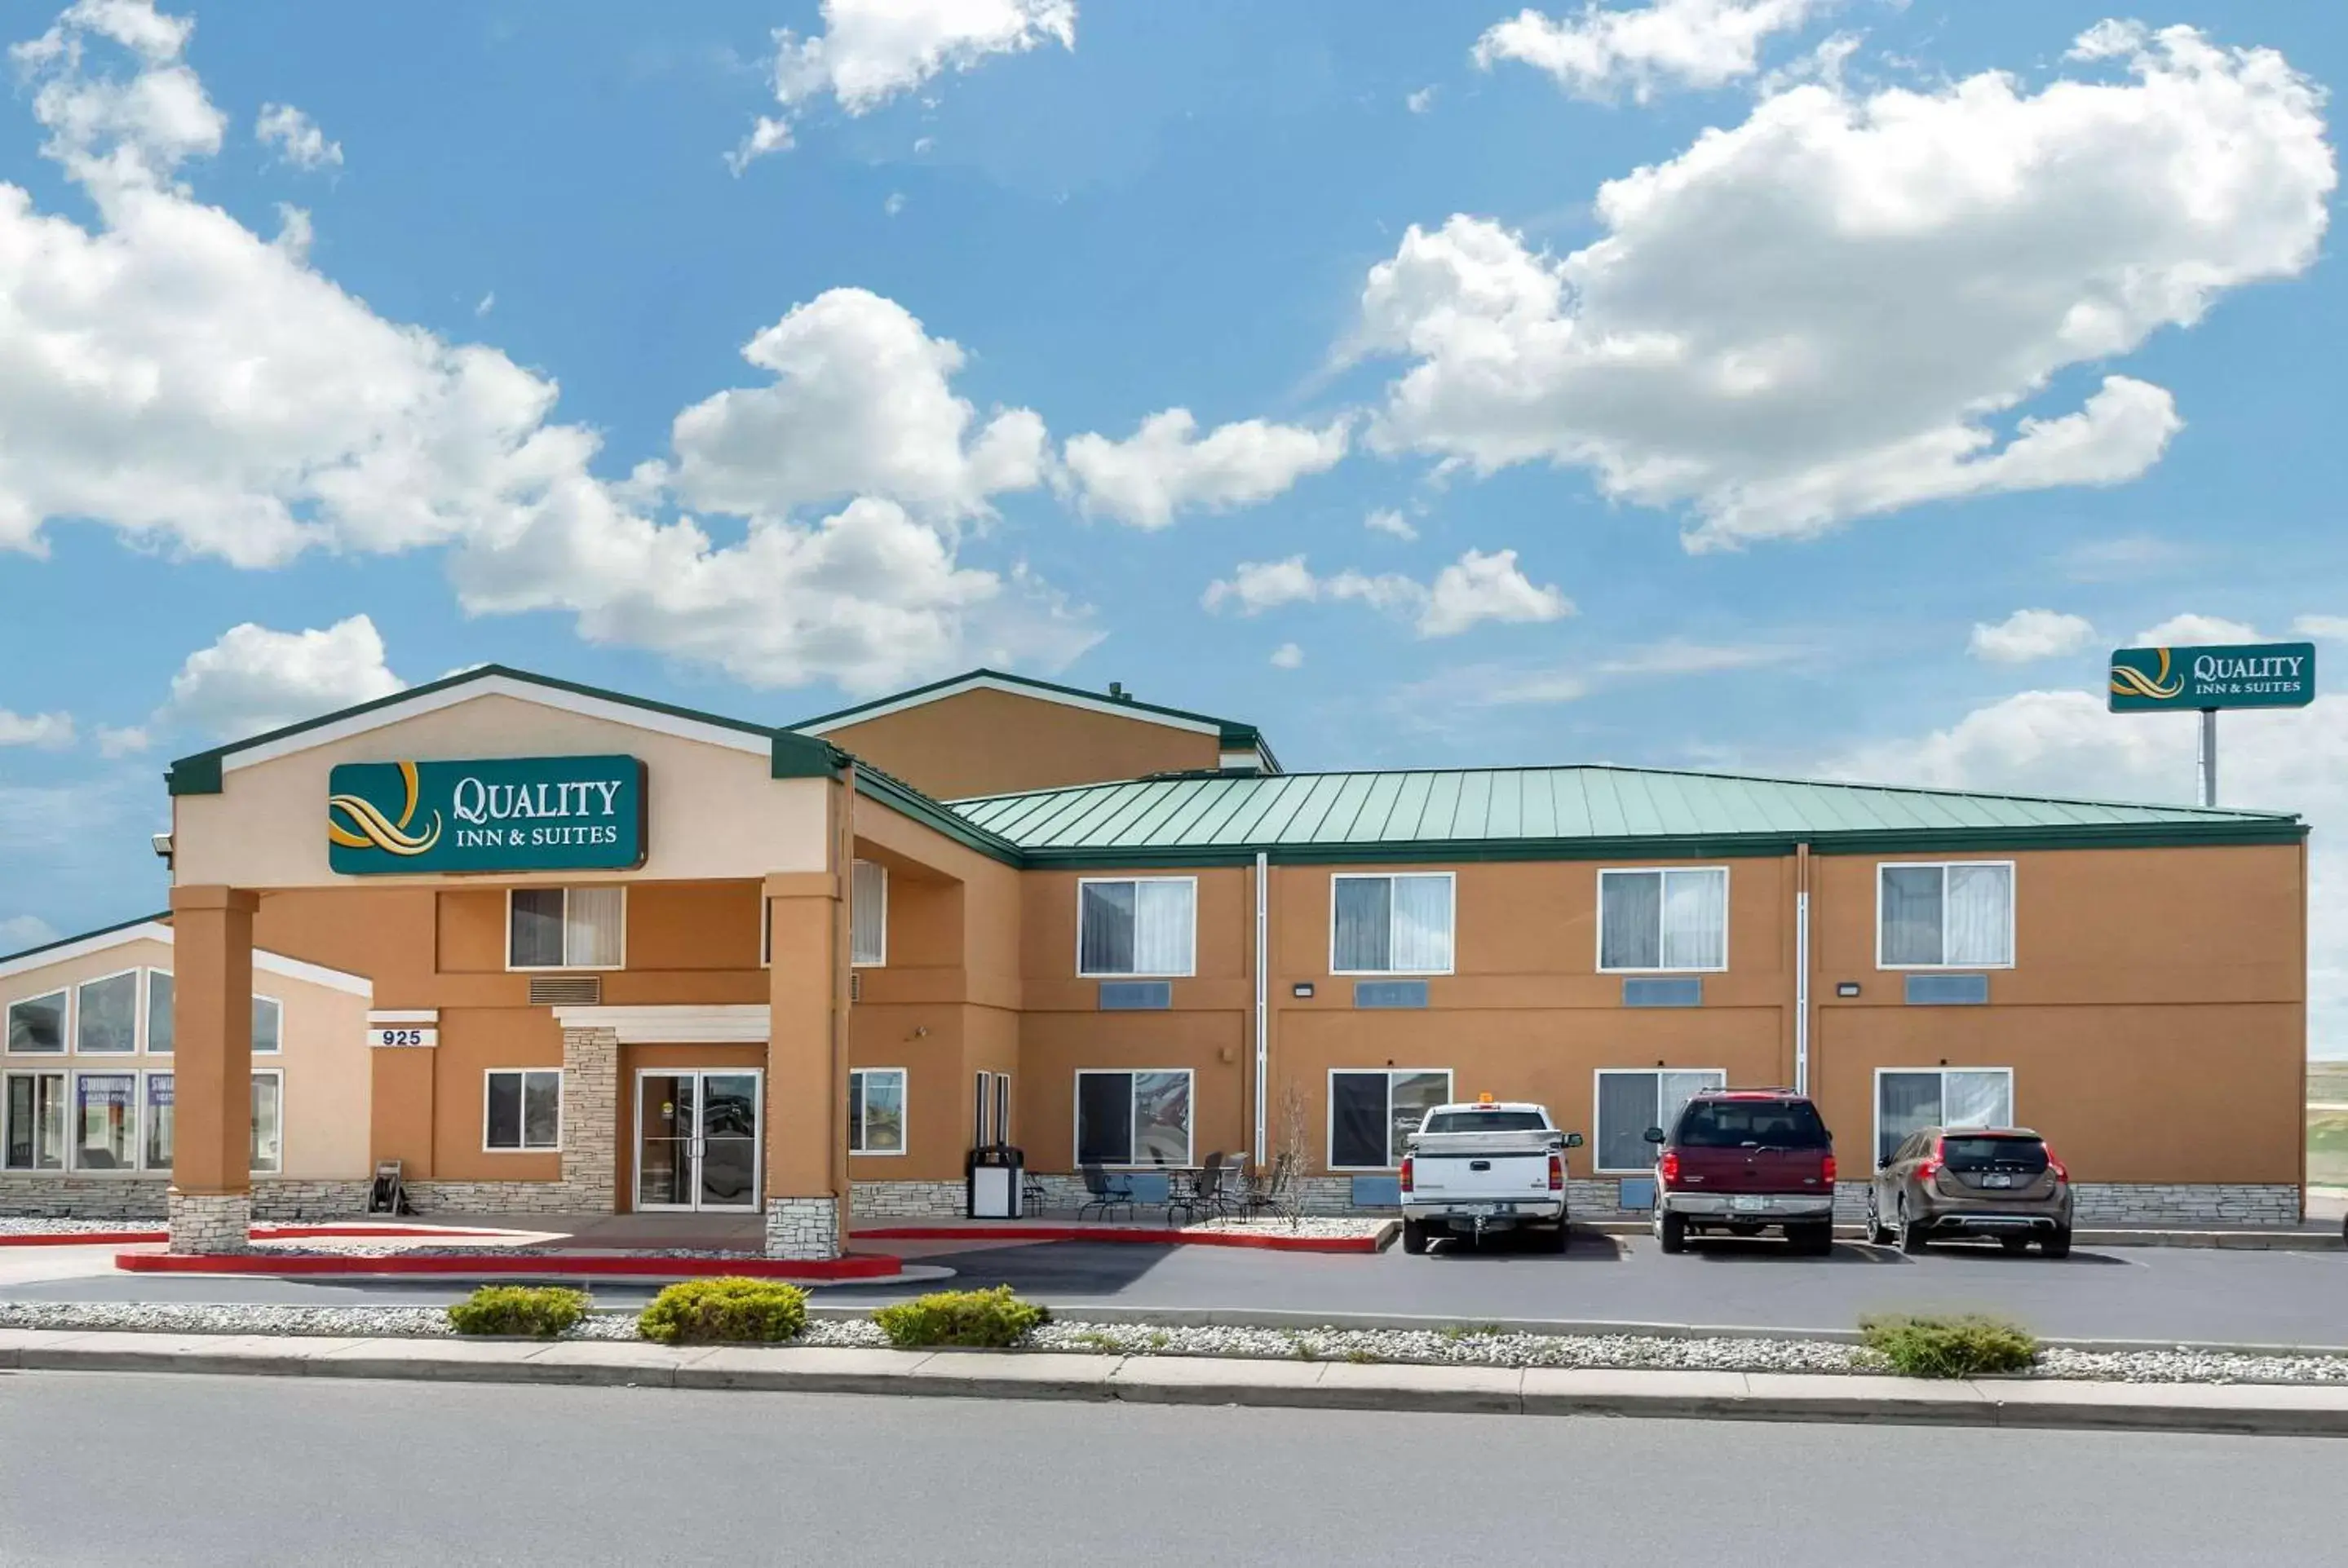 Property building in Quality Inn & Suites Limon